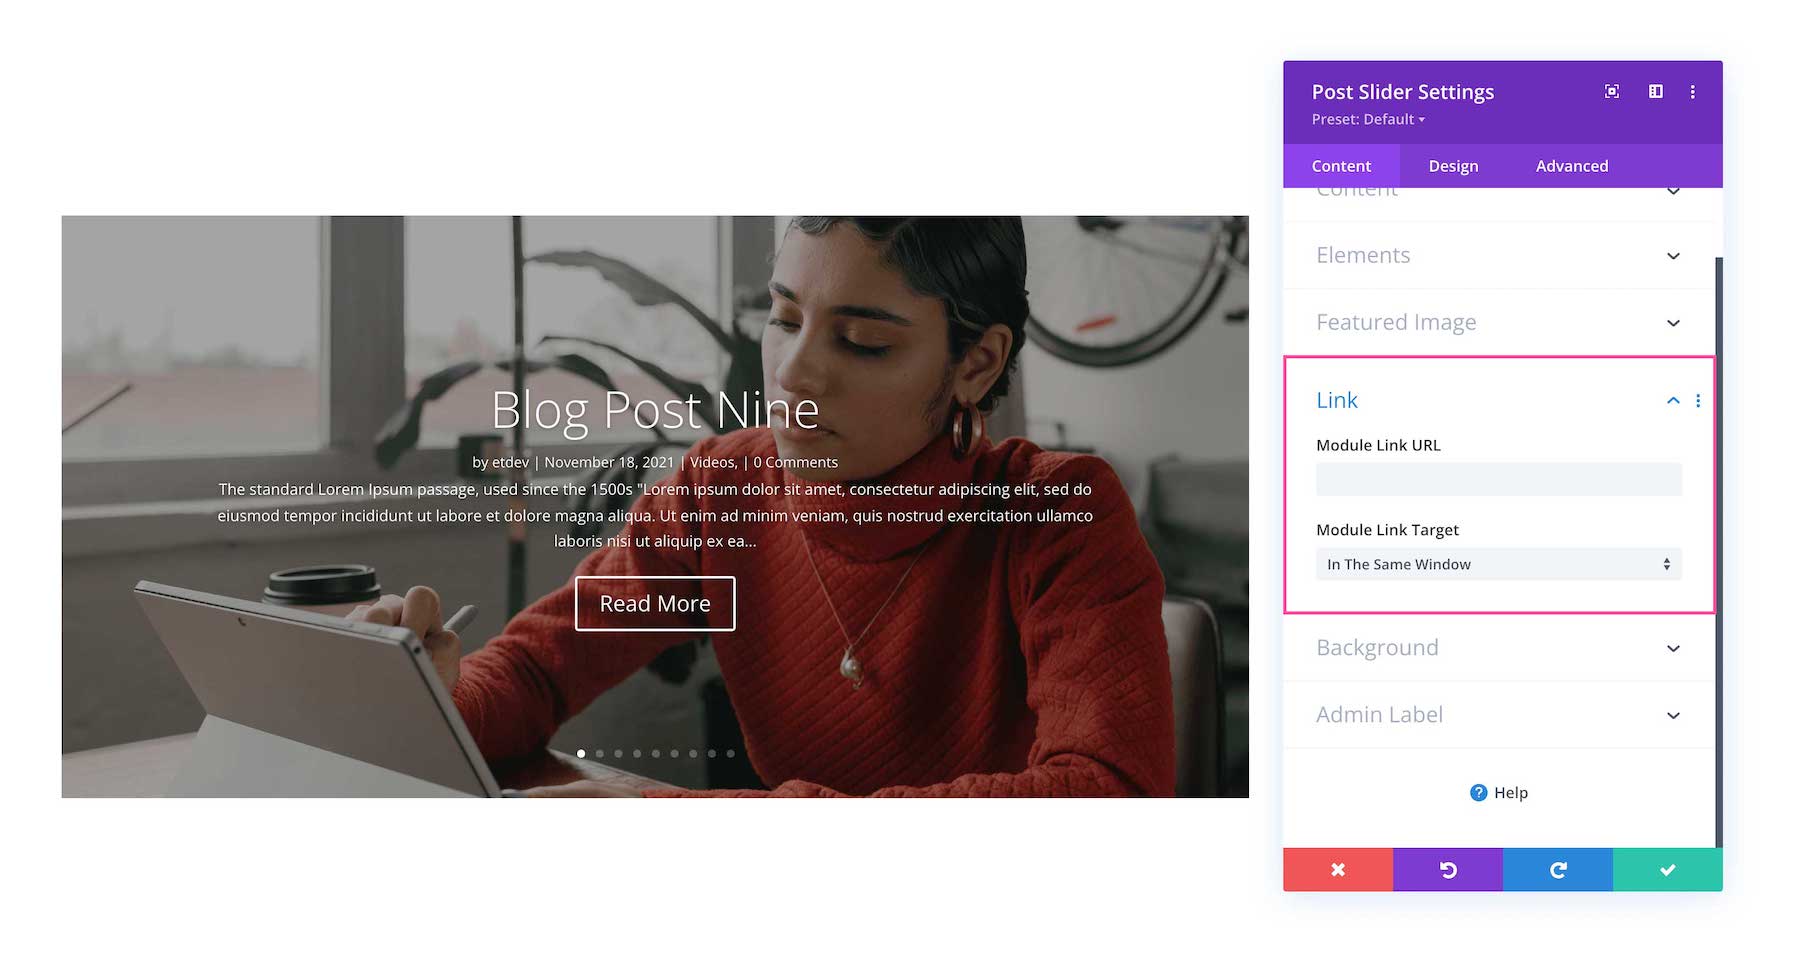 How to use the Divi Post Slider module